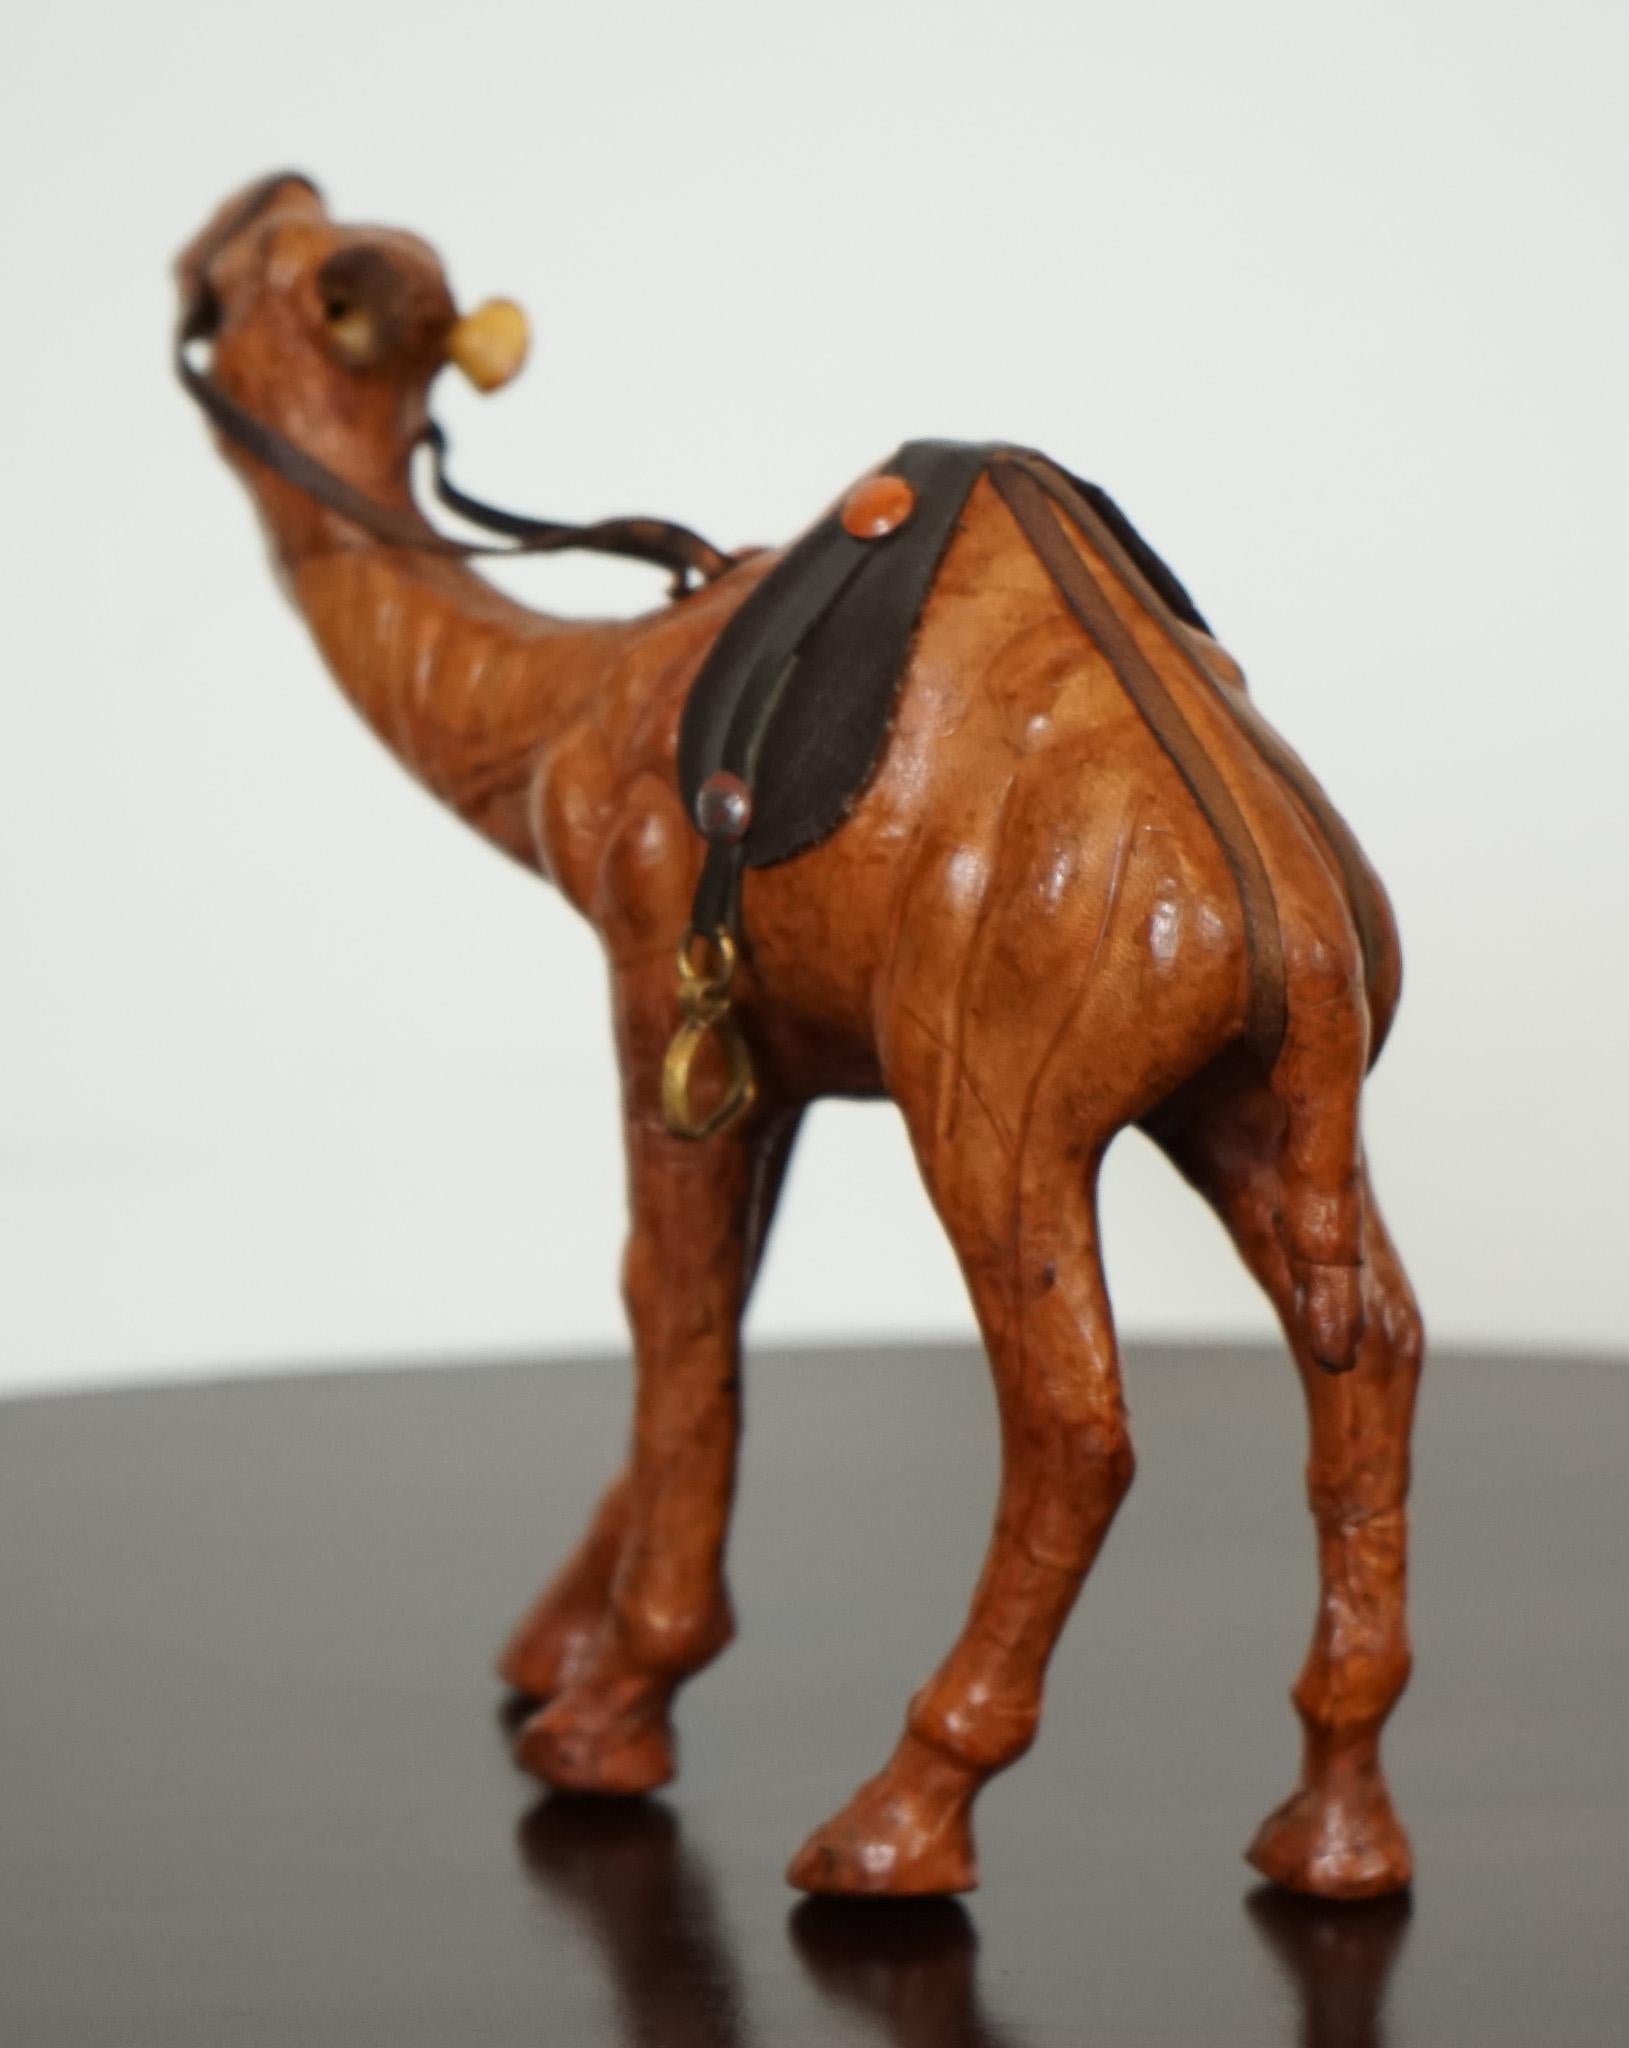 British LIBERTY'S LONDON CAMEL SCULPTURE WiTH LOVELY AGED LEATHER ON HAND CARVED WOOD  For Sale